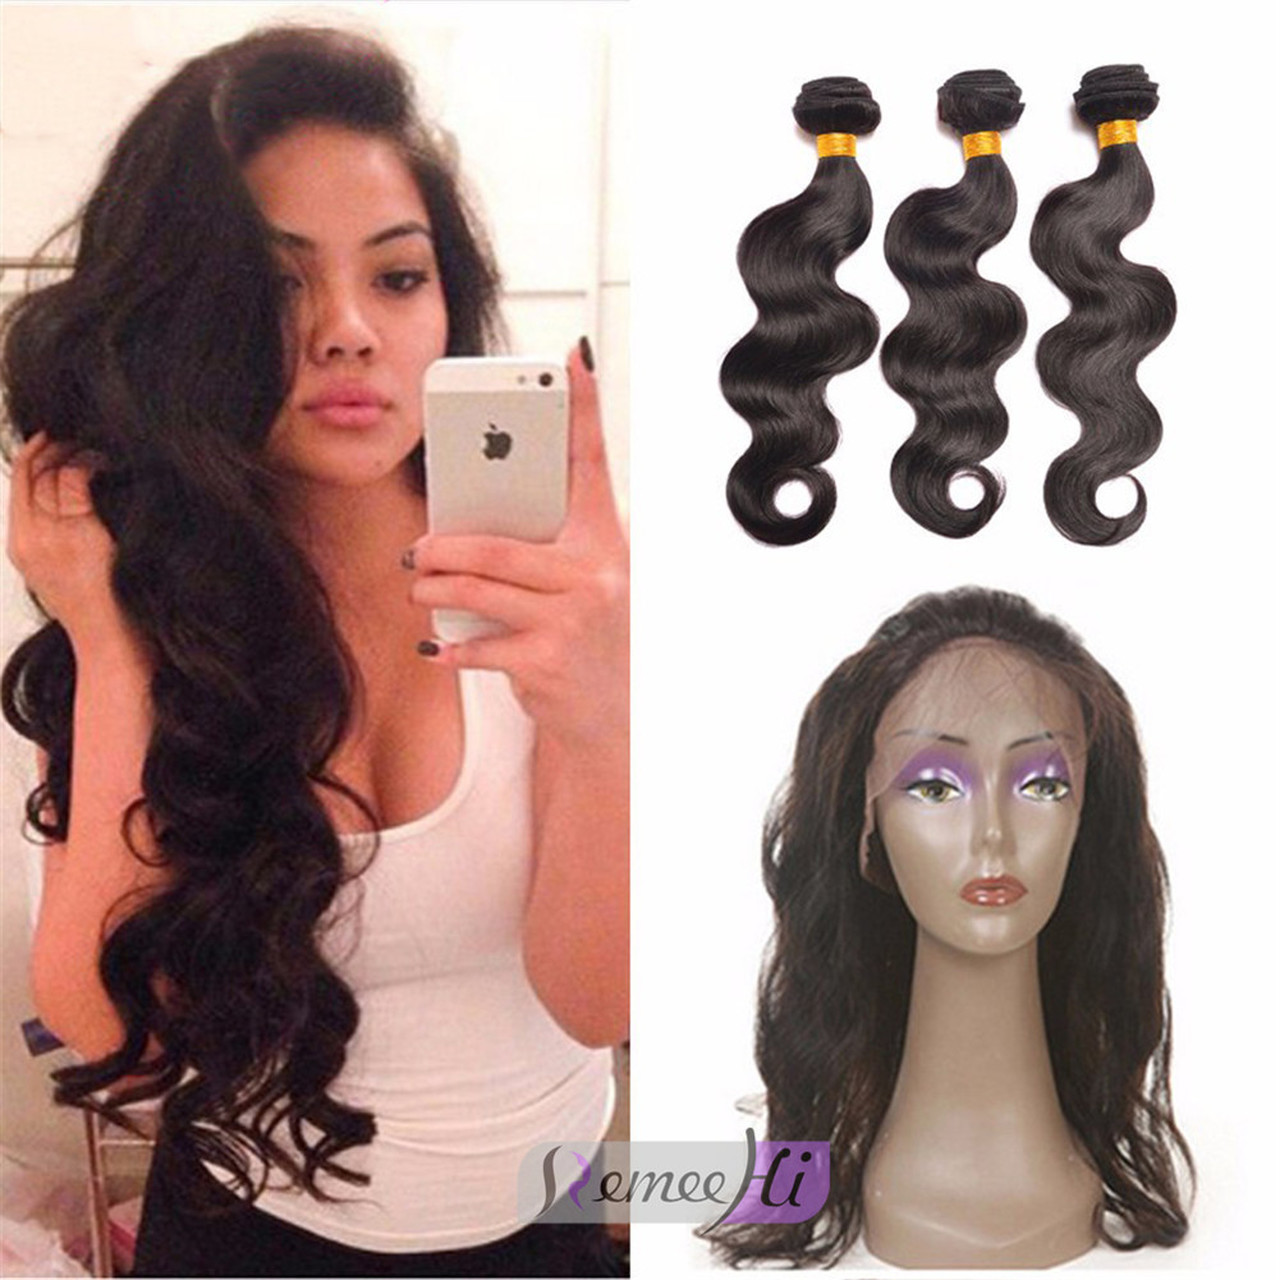 Remeehair.com | Remeehi Body Wave 360 Degree Lace Frontal Closure And 3 bundles Hair Weft 50g/pcs Indian remy Hair